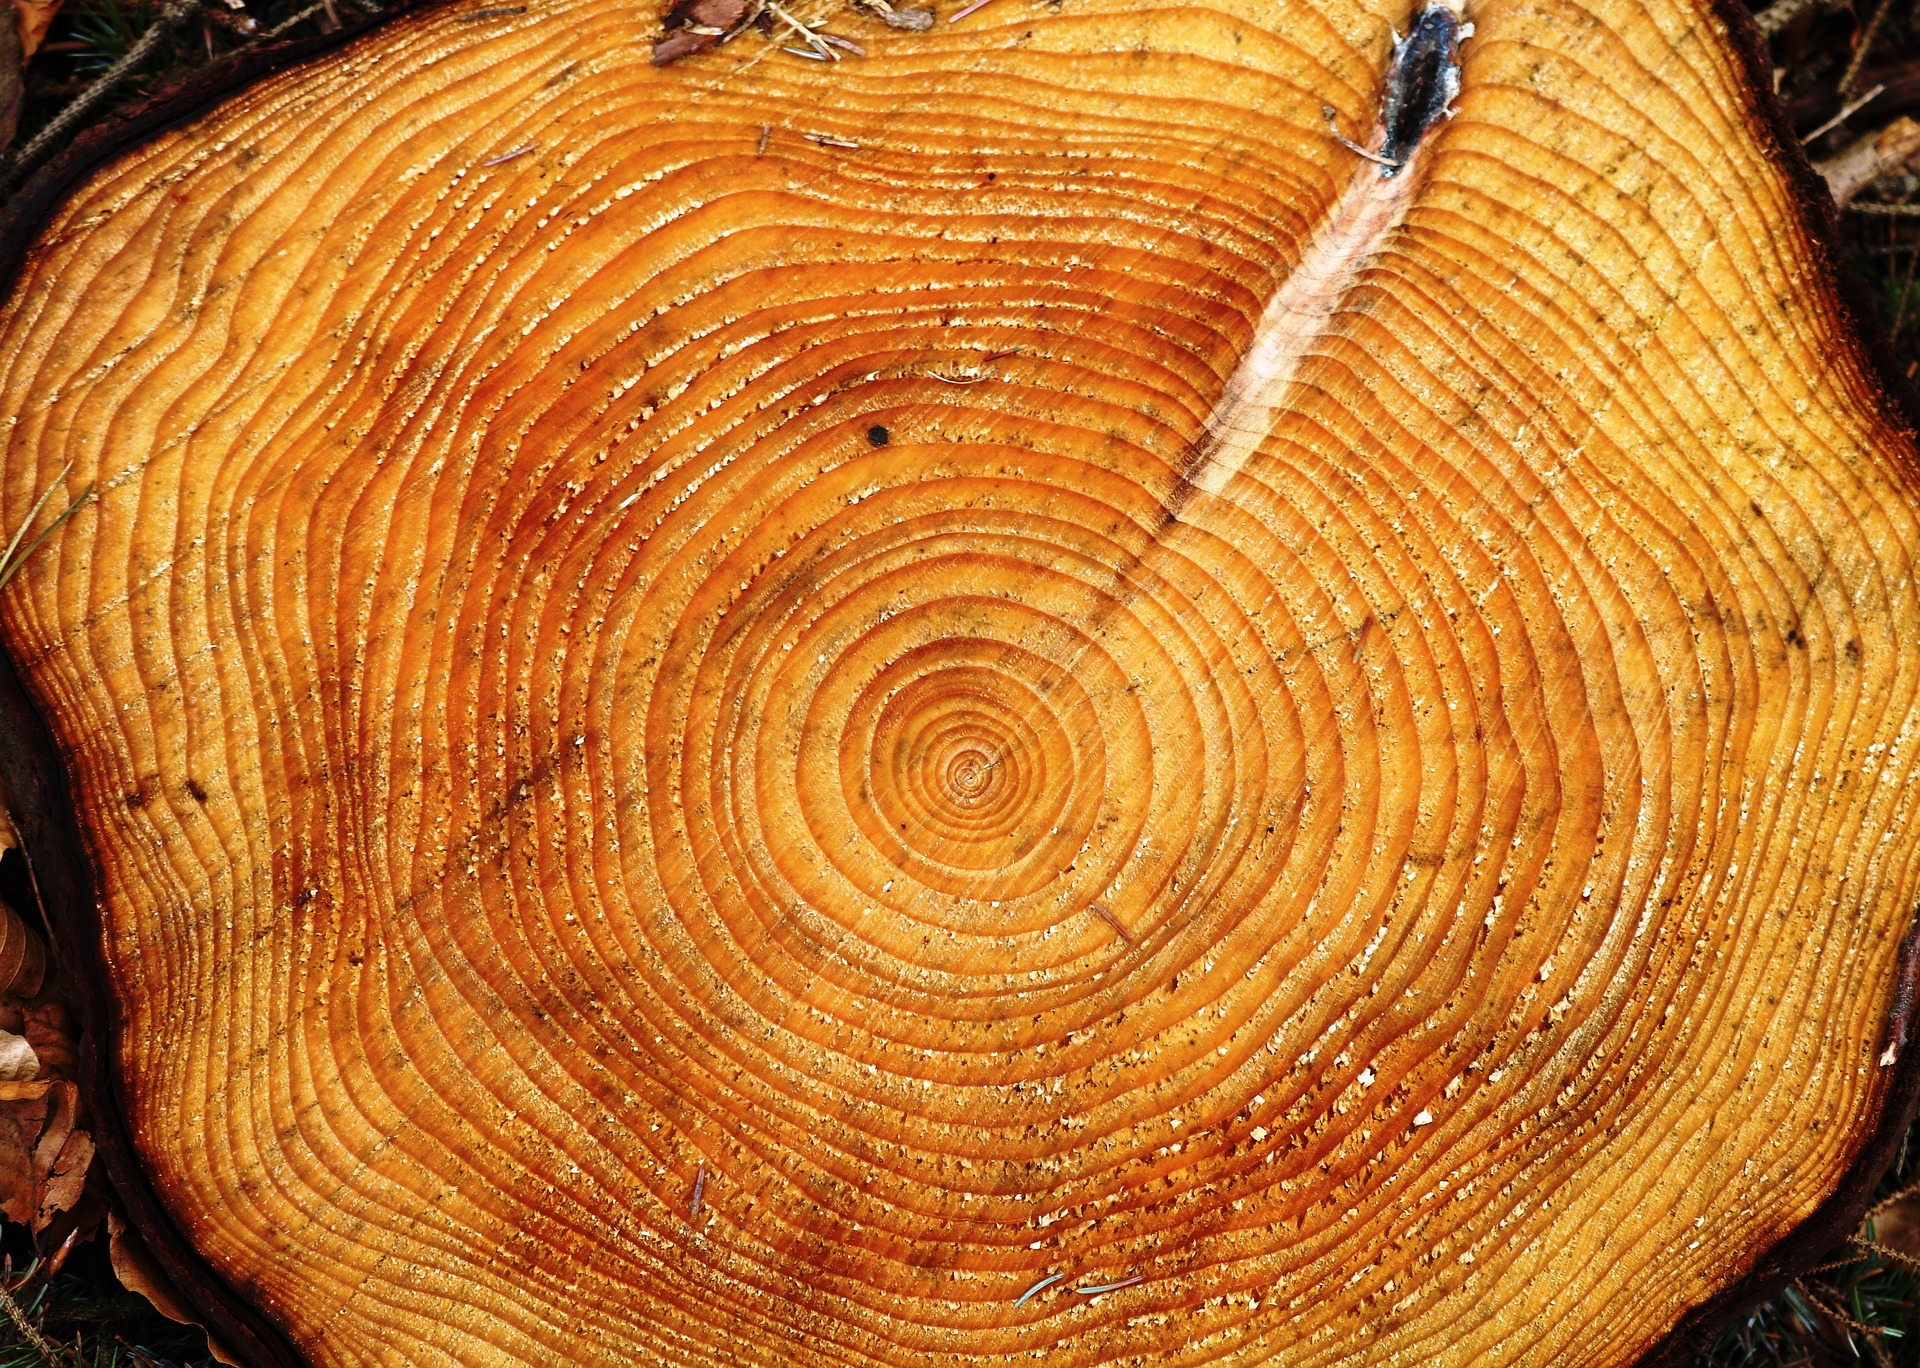 A close-up image of tree rings